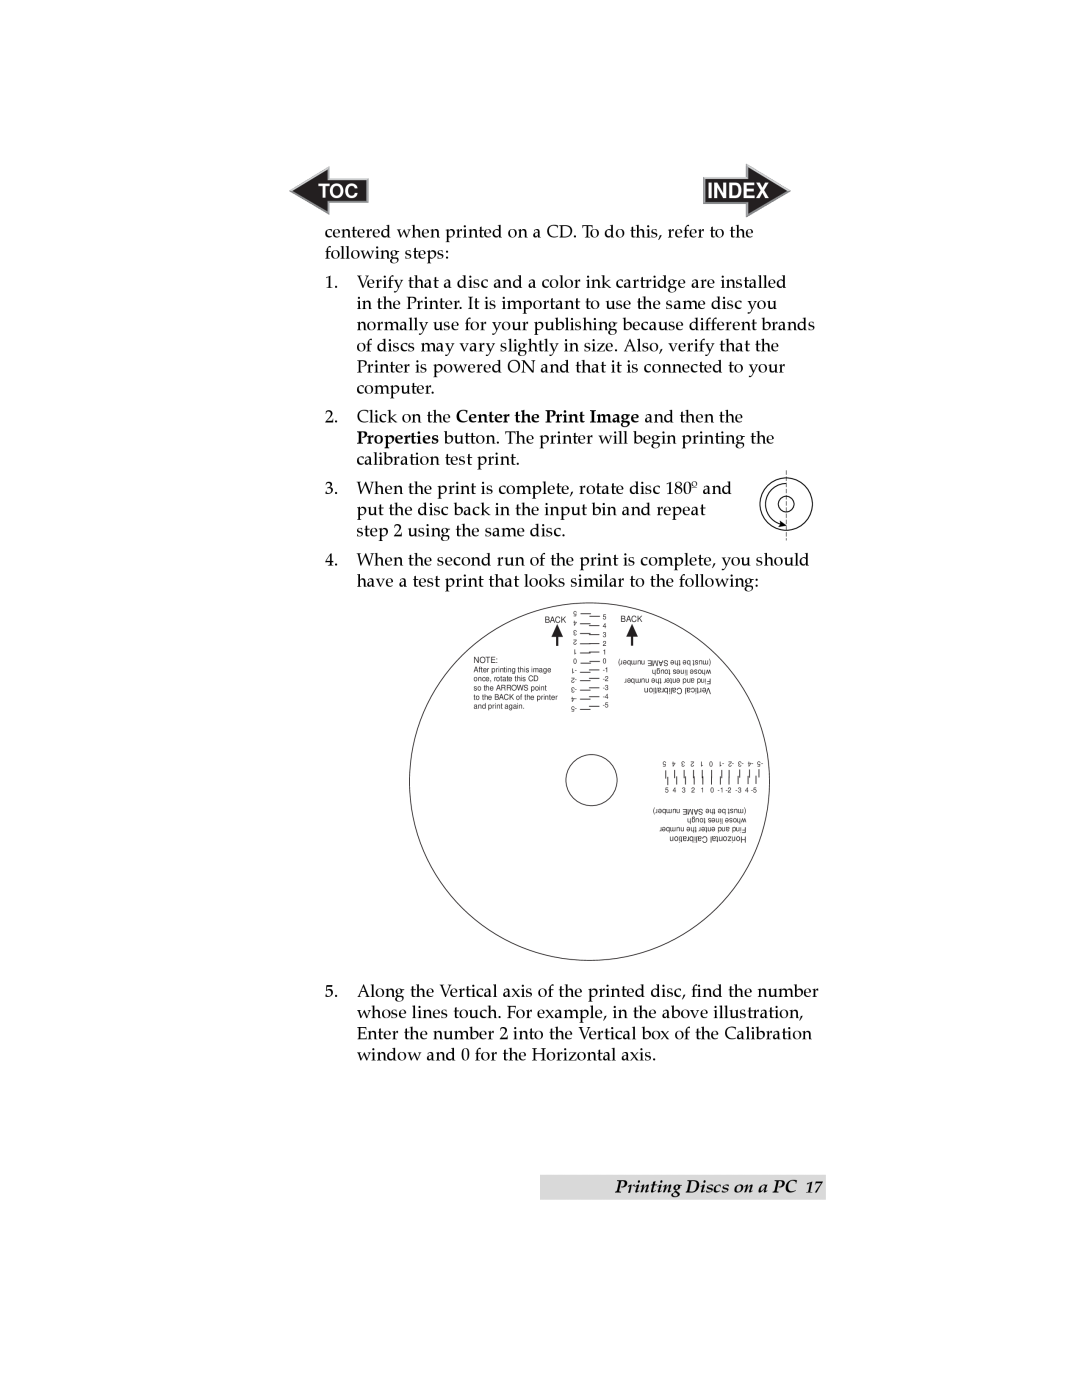 Primera Technology Automated Optical Disc Printing System user manual Index, using the same disc, Printing Discs on a PC 